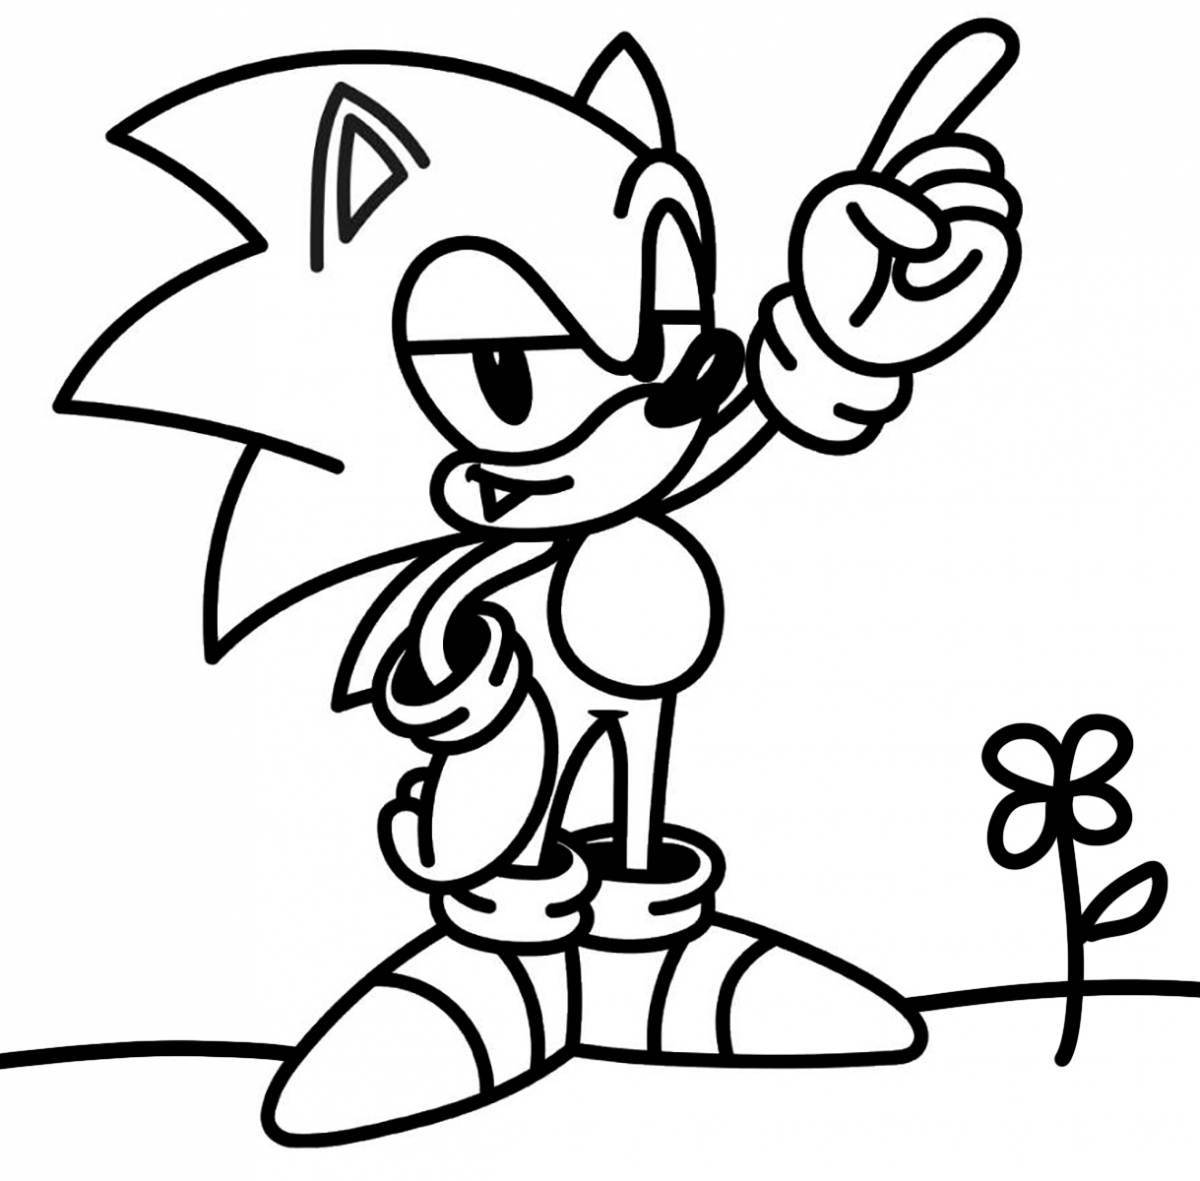 Awesome golden sonic coloring book